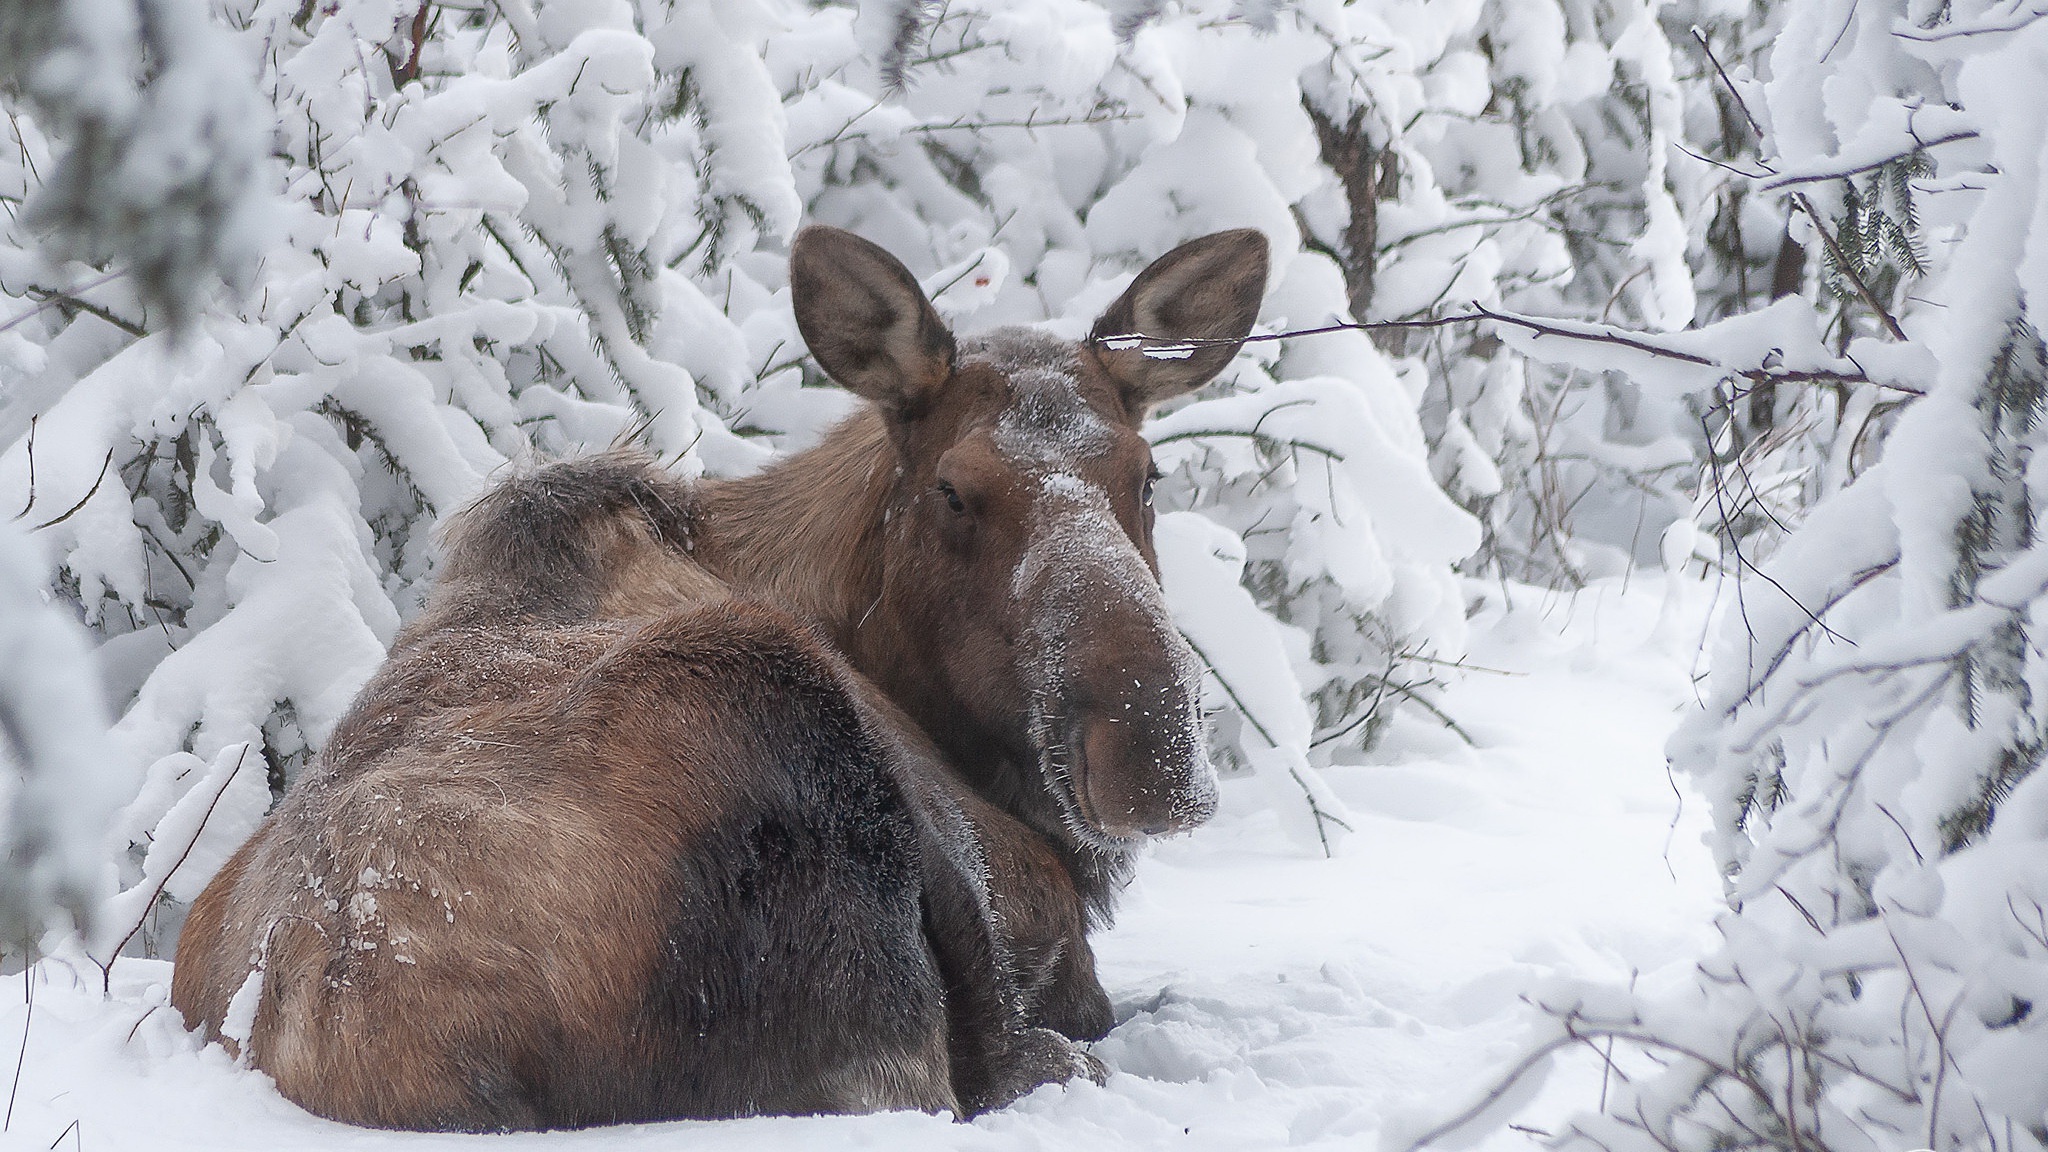 General 2048x1152 nature winter cold outdoors mammals animals snow moose